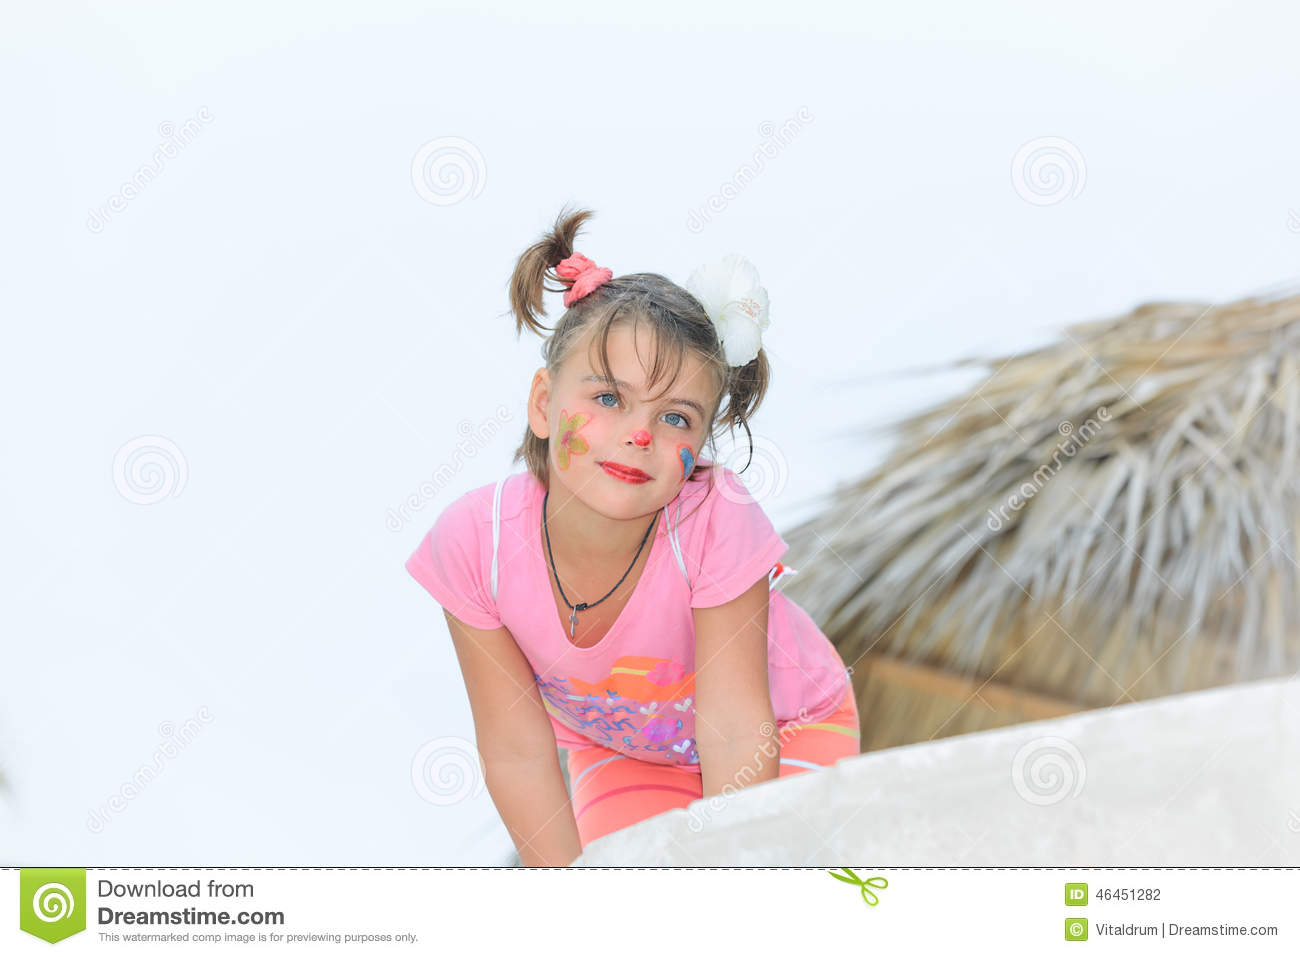 woman sitting on kids face